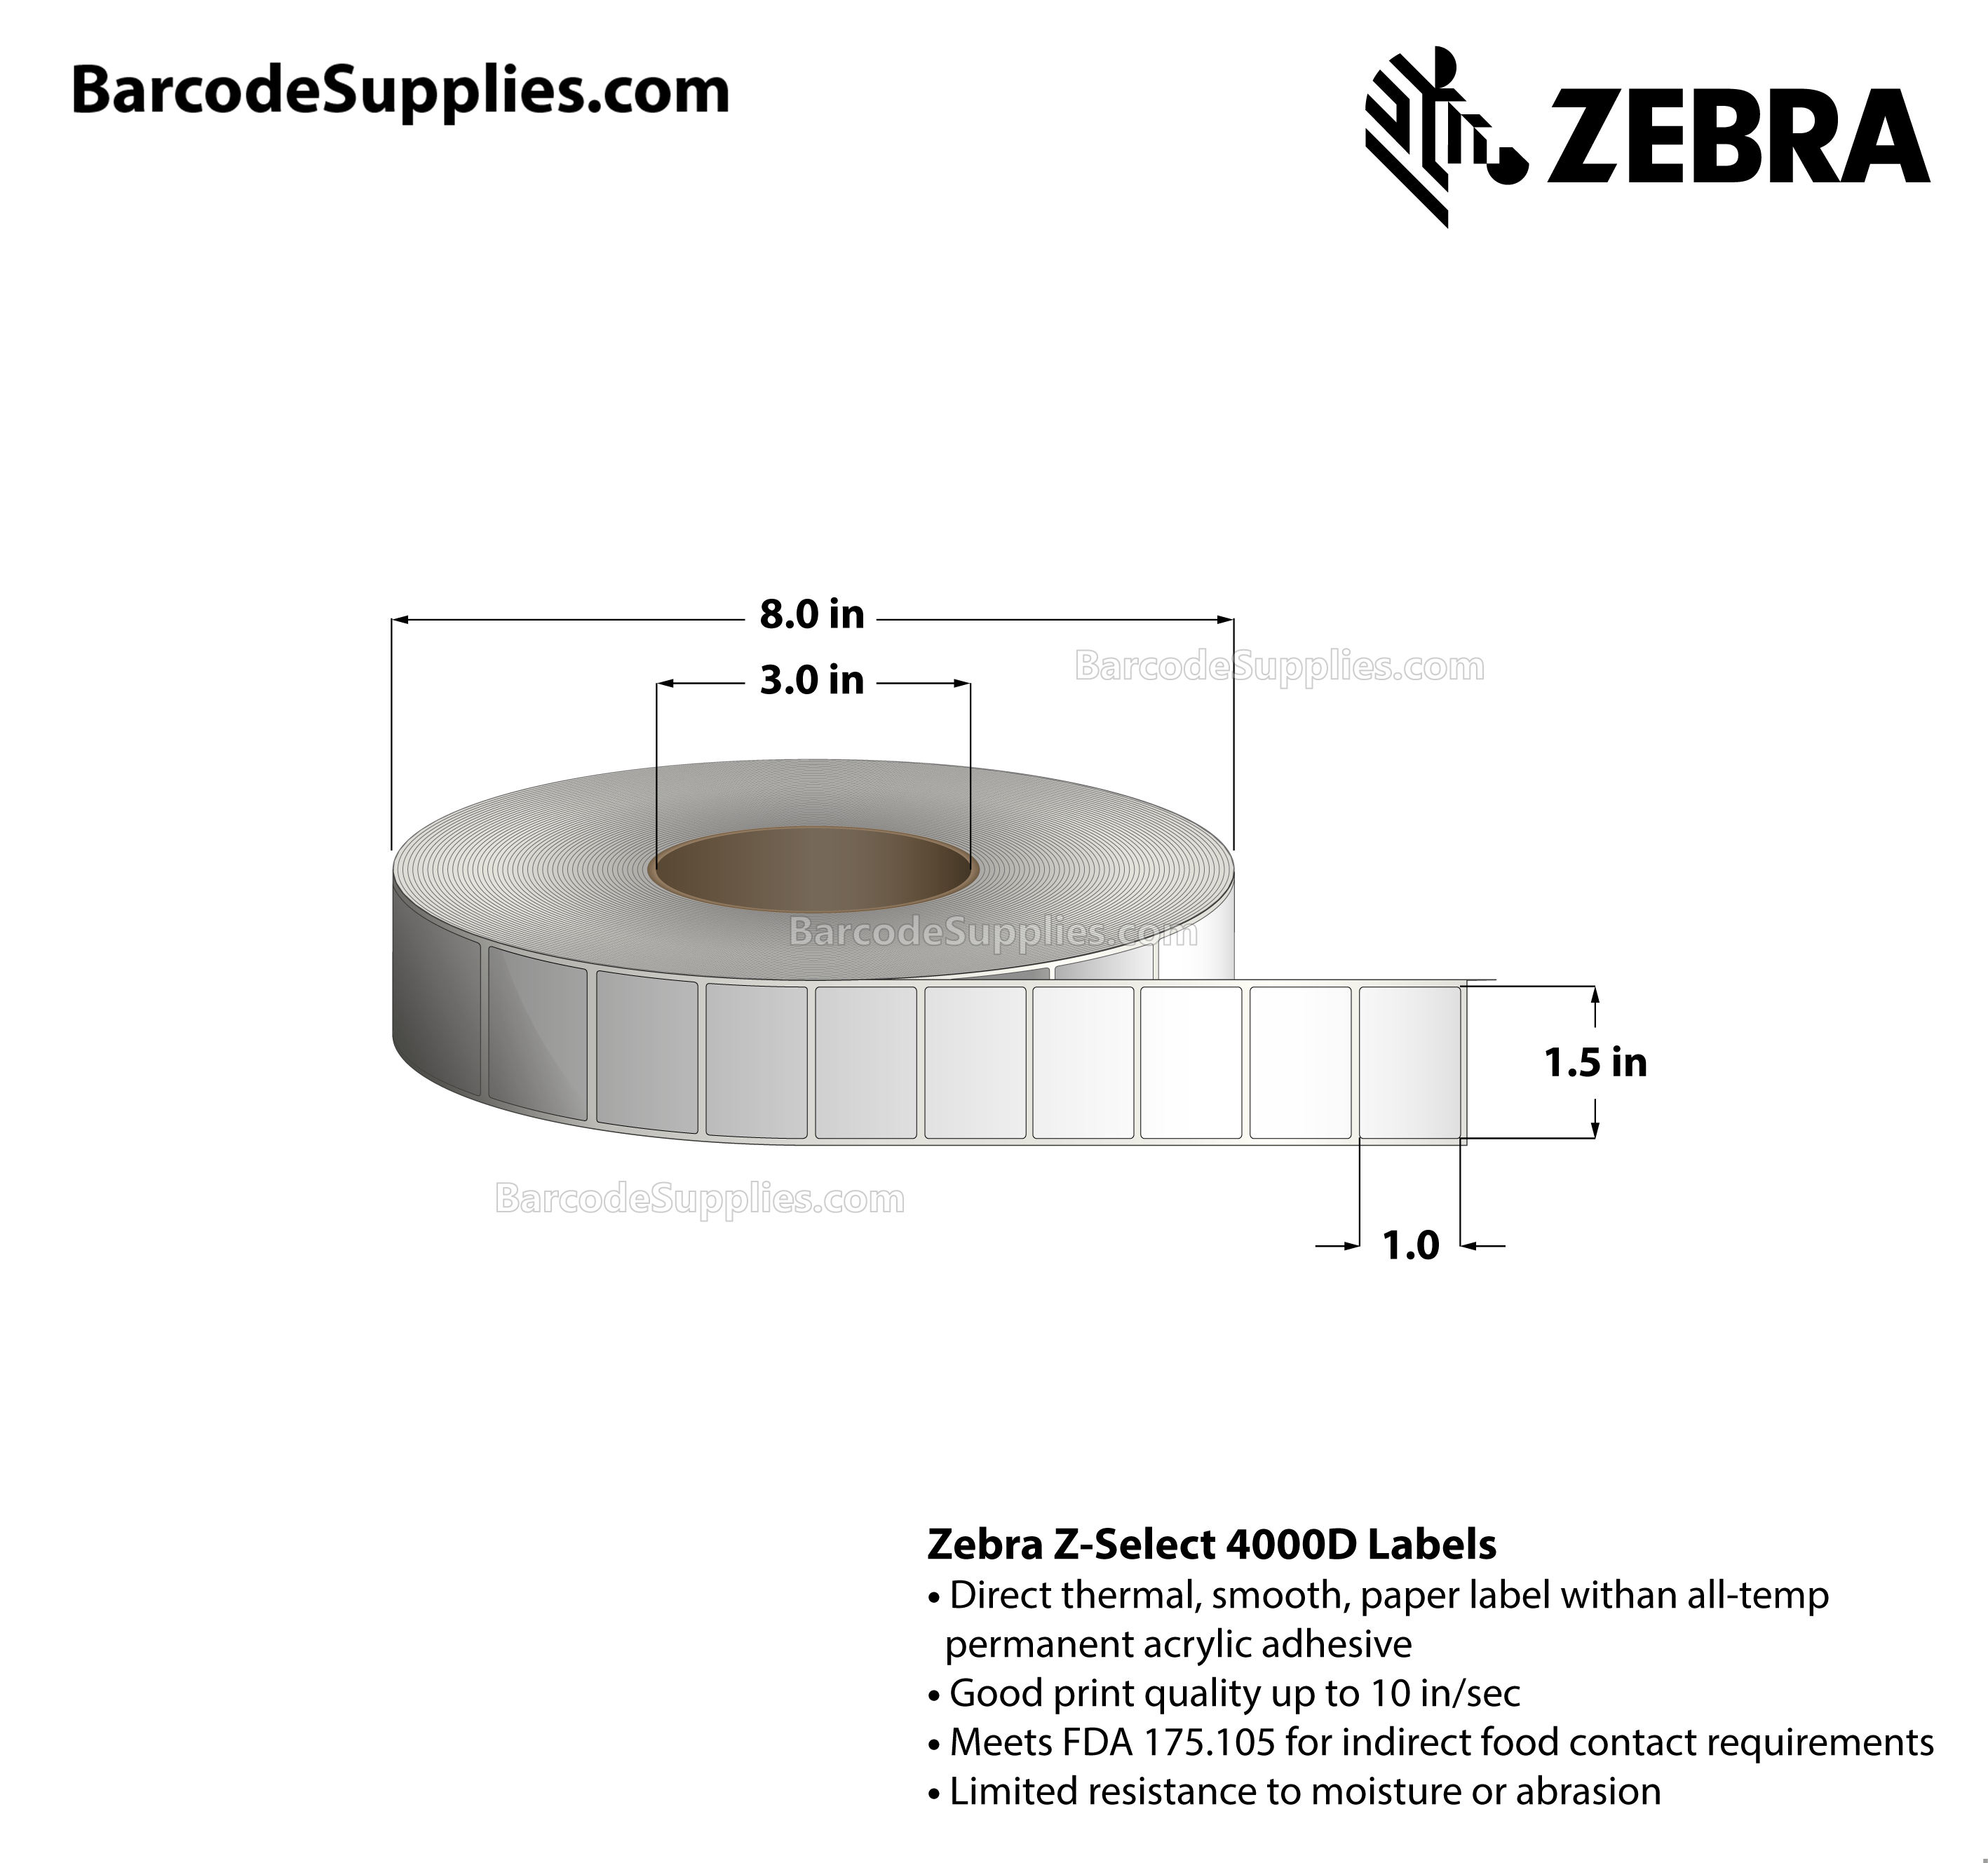 1.5 x 1 Direct Thermal White Z-Select 4000D Labels With All-Temp Adhesive - No Perforation - 5120 Labels Per Roll - Carton Of 14 Rolls - 71680 Labels Total - MPN: 88686